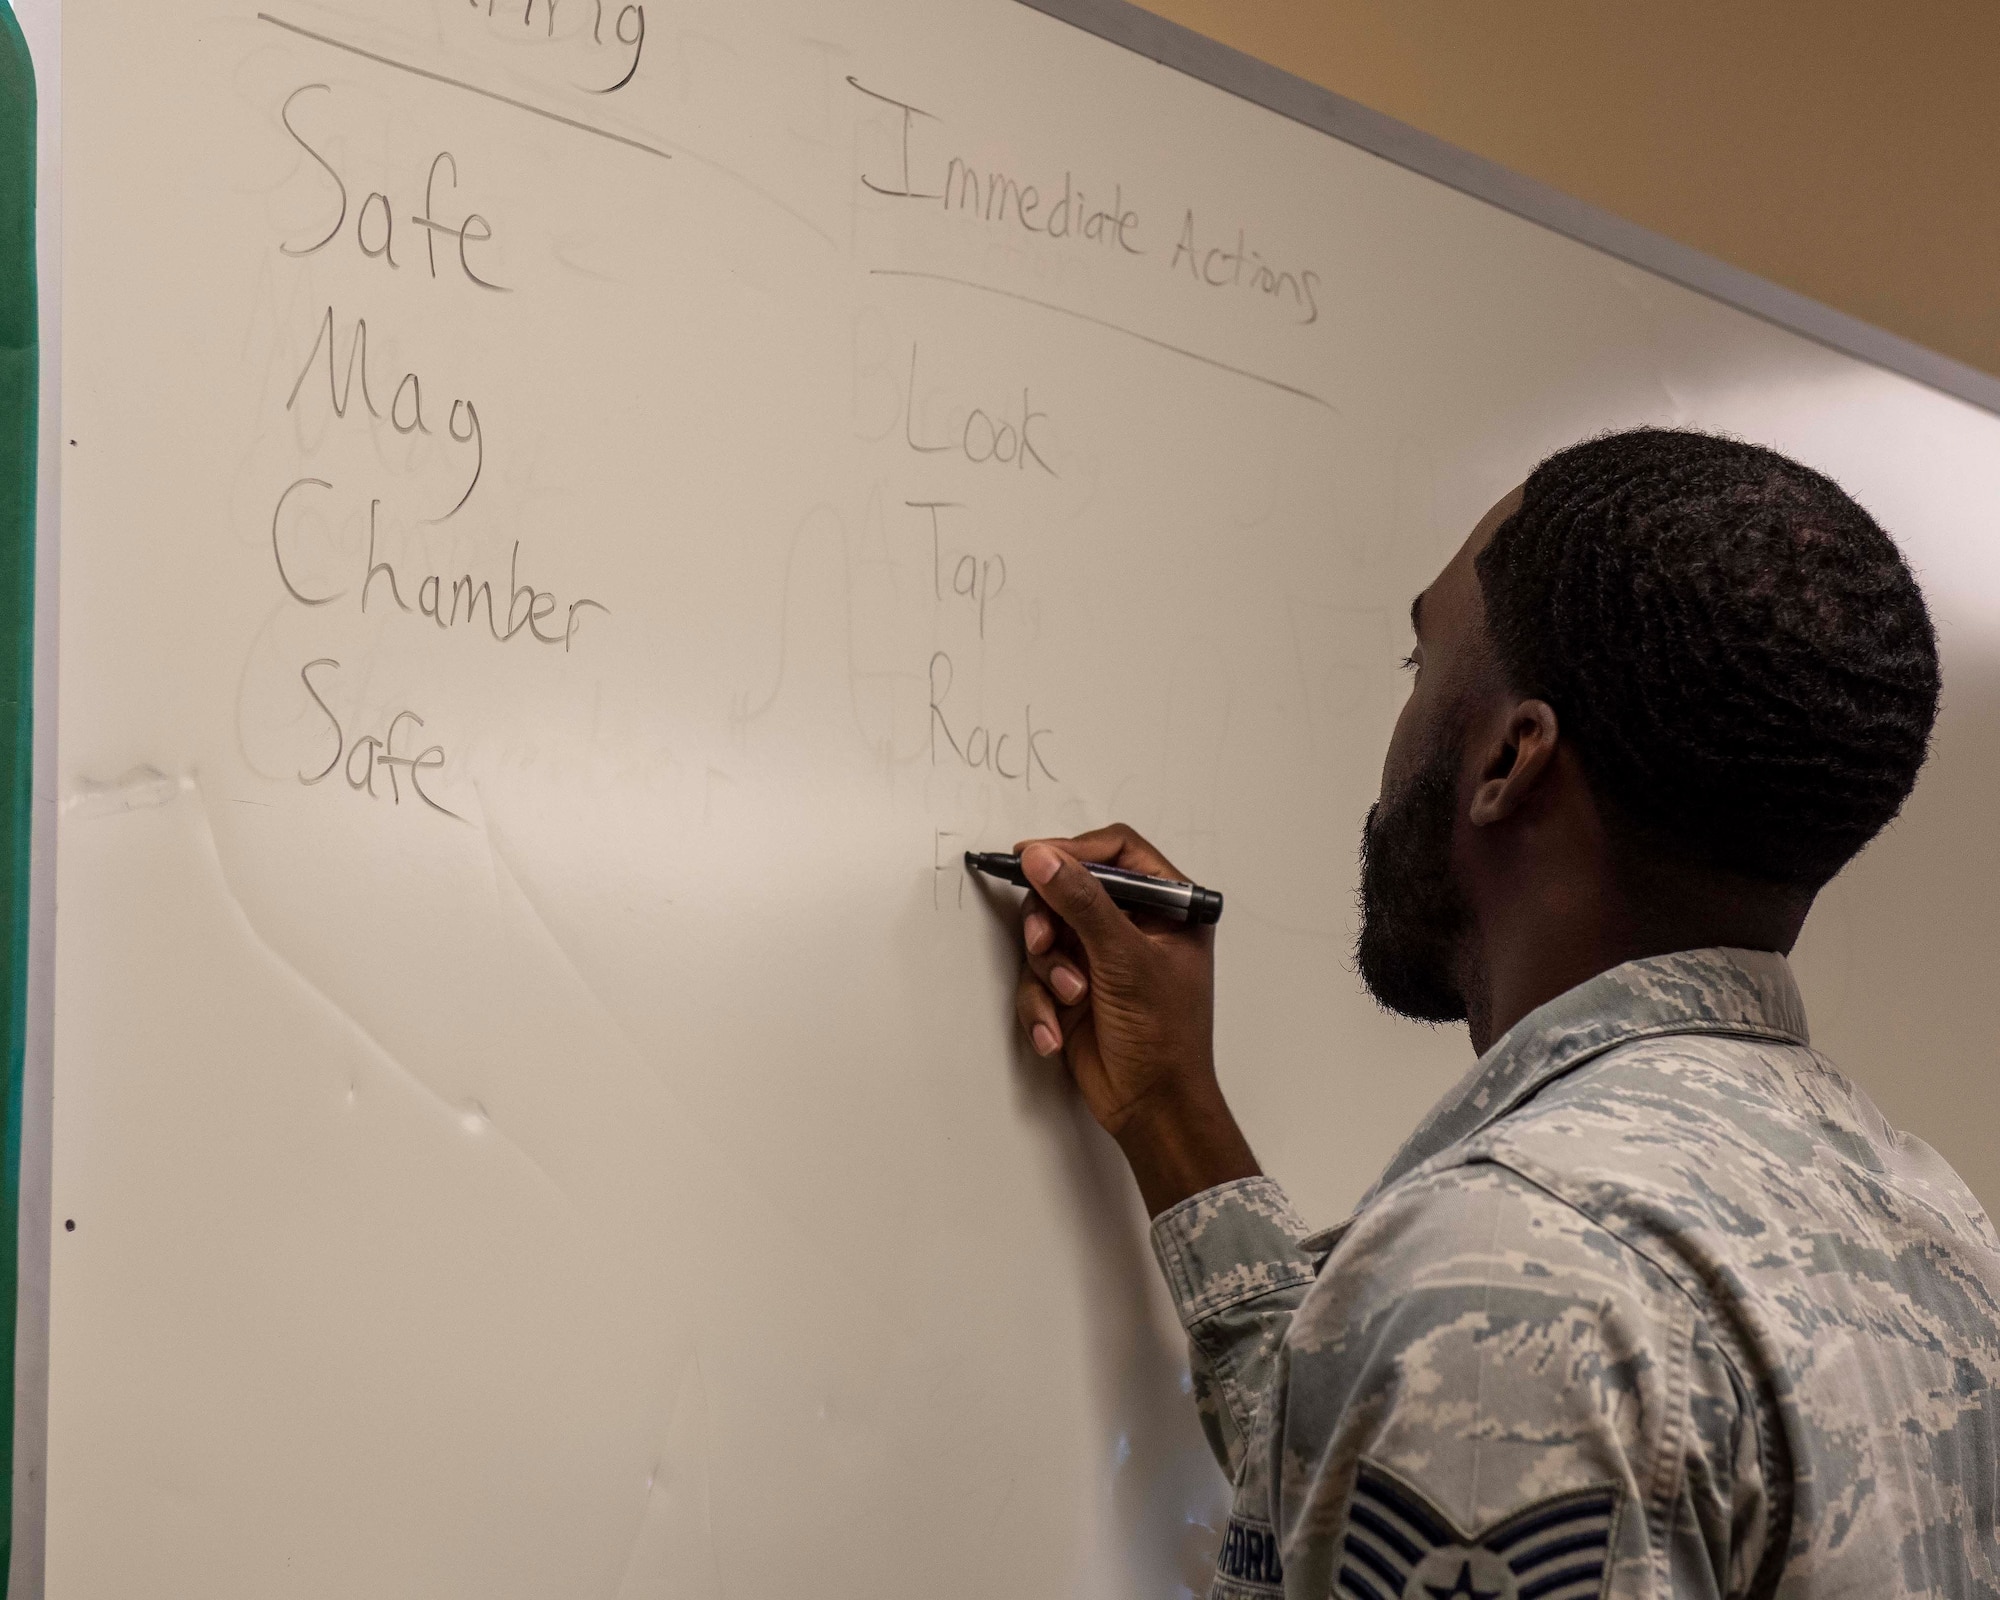 A male instructor writes with a marker on a dry erase board